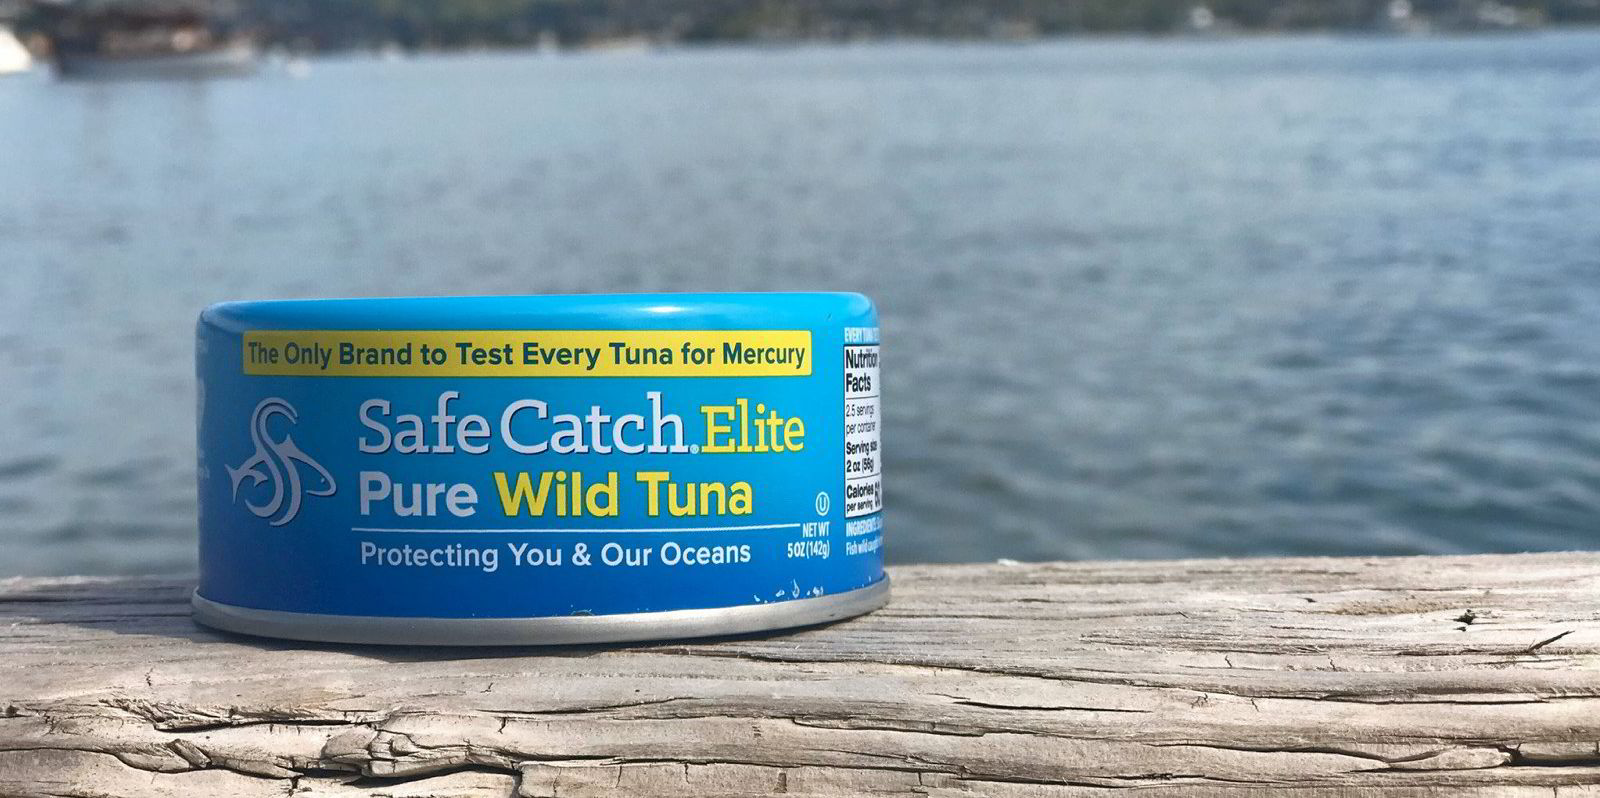 Watchdog finds some of 'mercury tested' canned tuna group's marketing  claims misleading